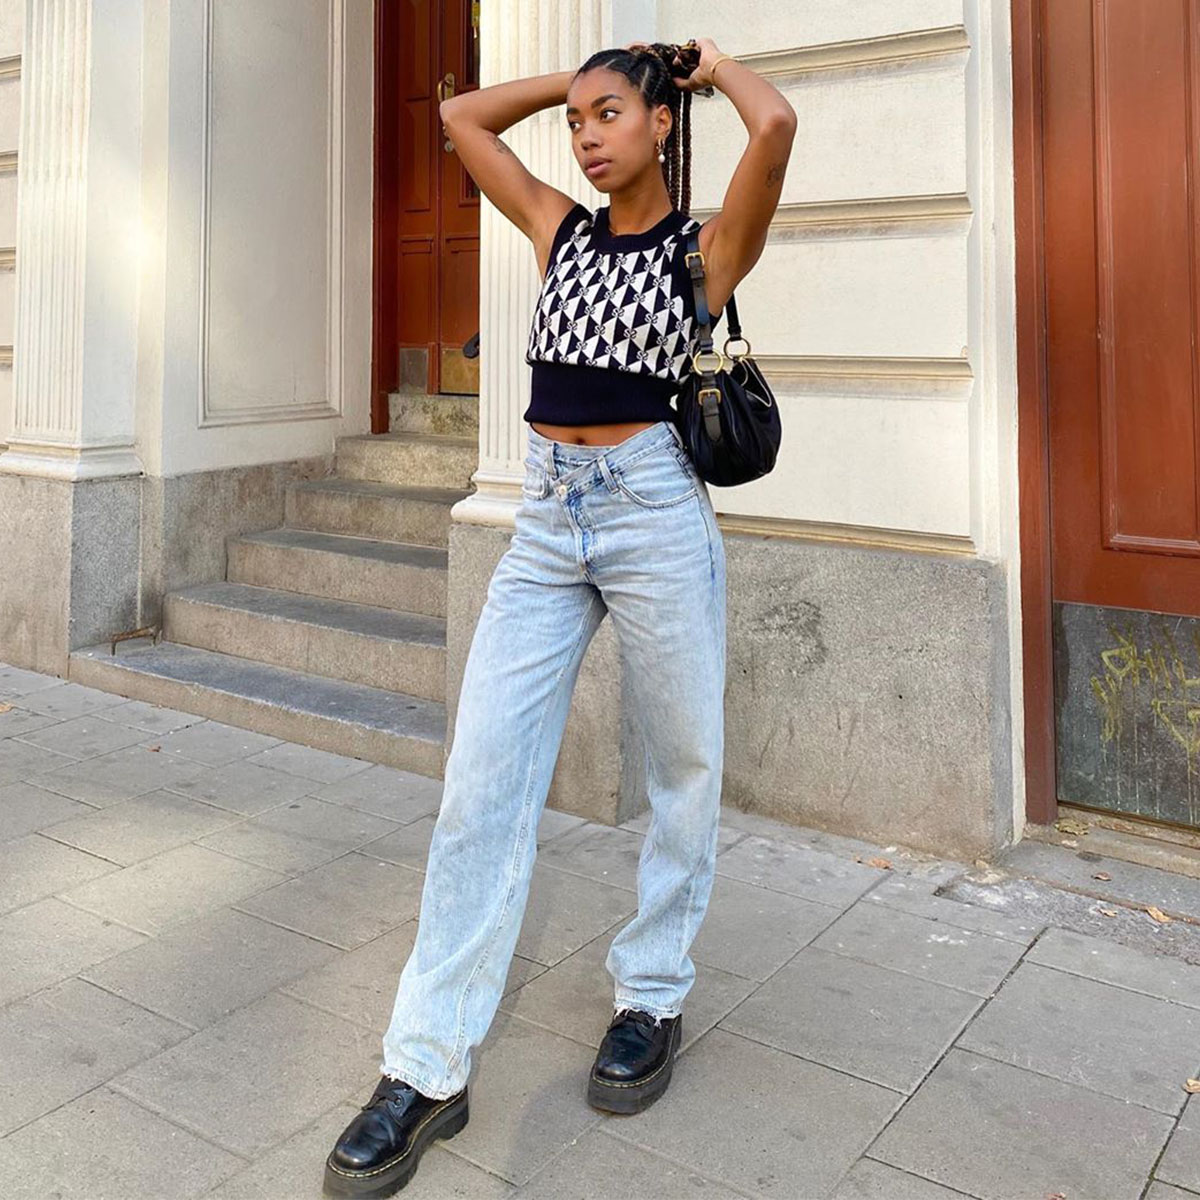 11 Outfits With Combat Boots You'll Want to Try | Who What Wear